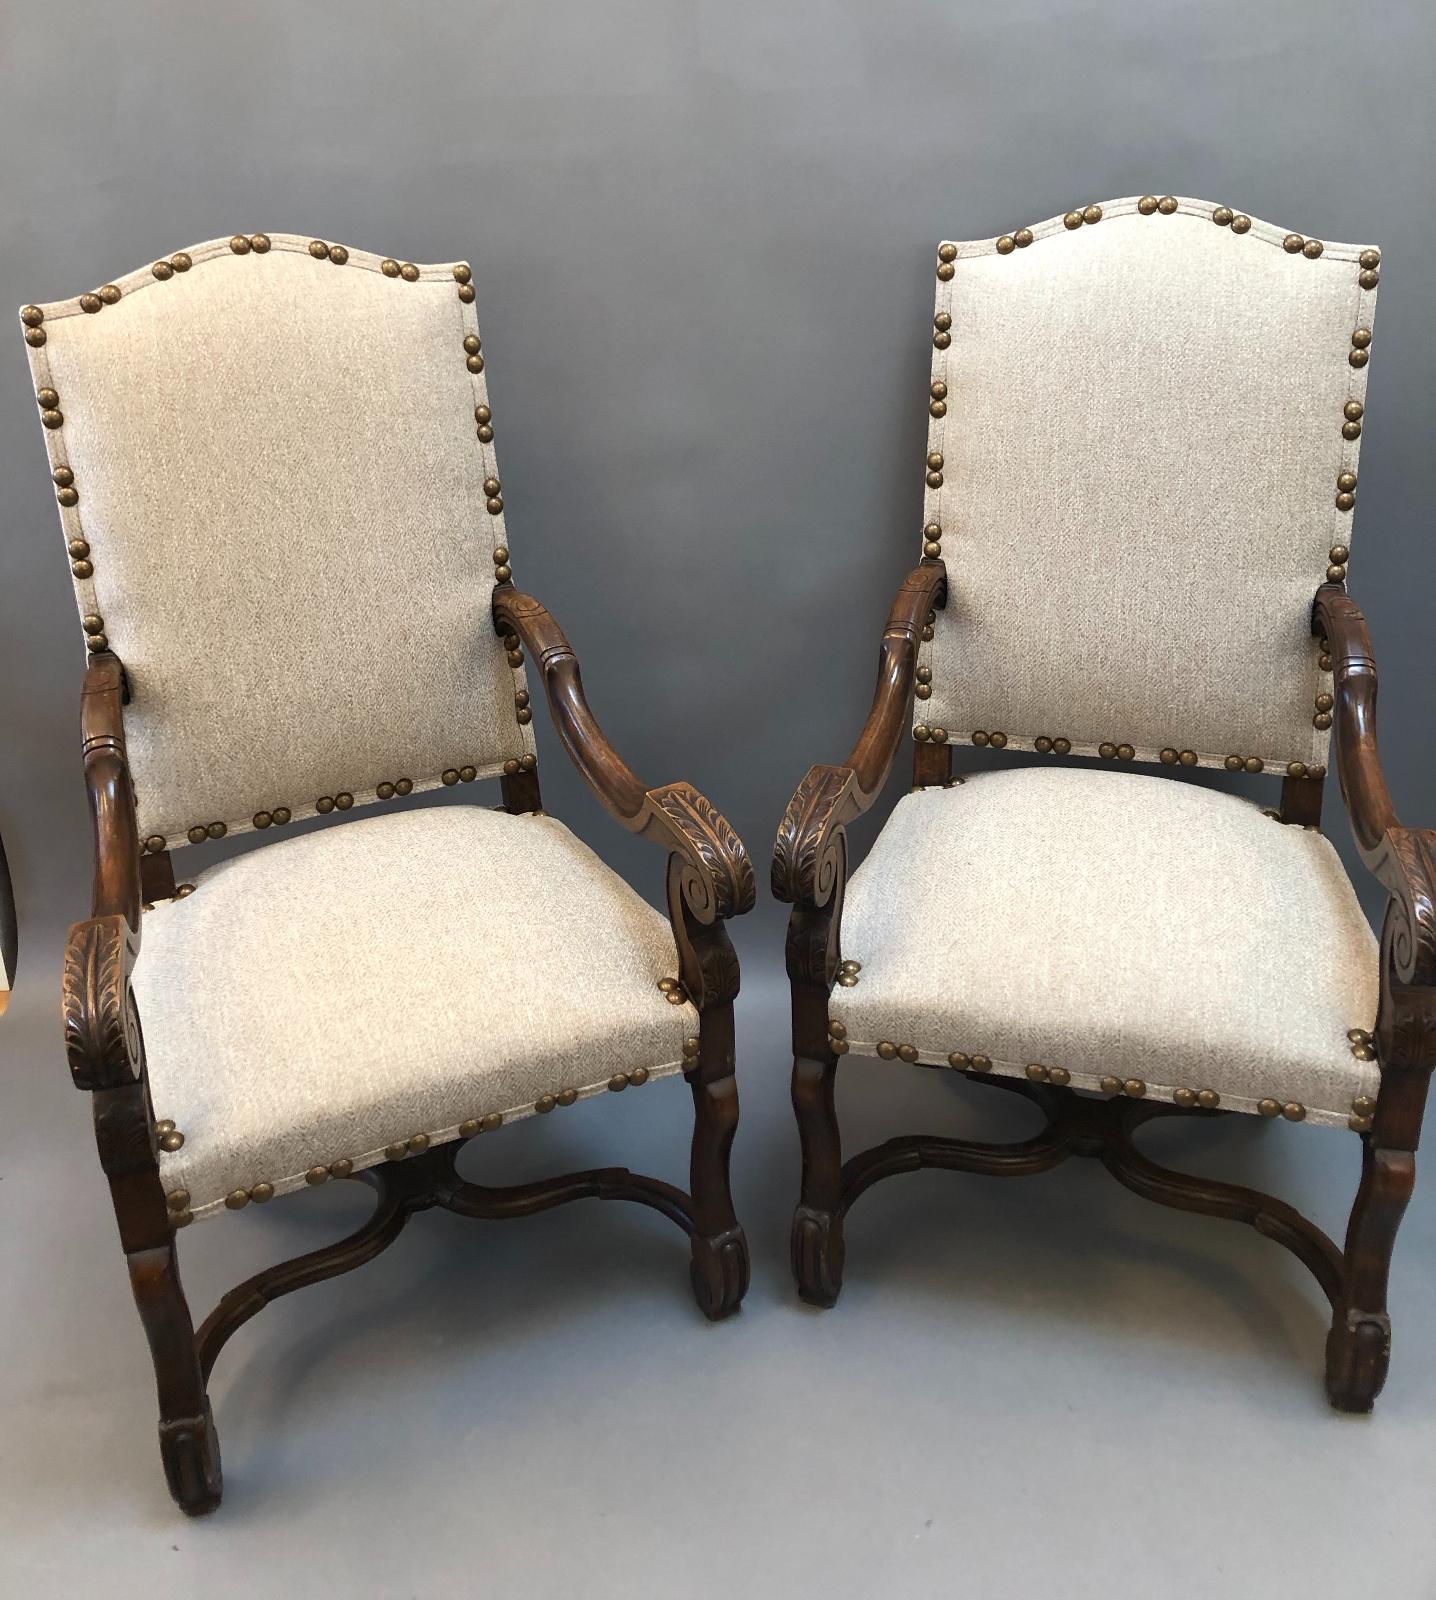 Set of Eight French Provincial Louis XIV Style Dining Chairs. Richly patinated walnut with carved “os de mouton” (mutton-bone) legs and stretchers. Two Armchairs and Six Side chairs, all recently reupholstered with nail head decoration. Great